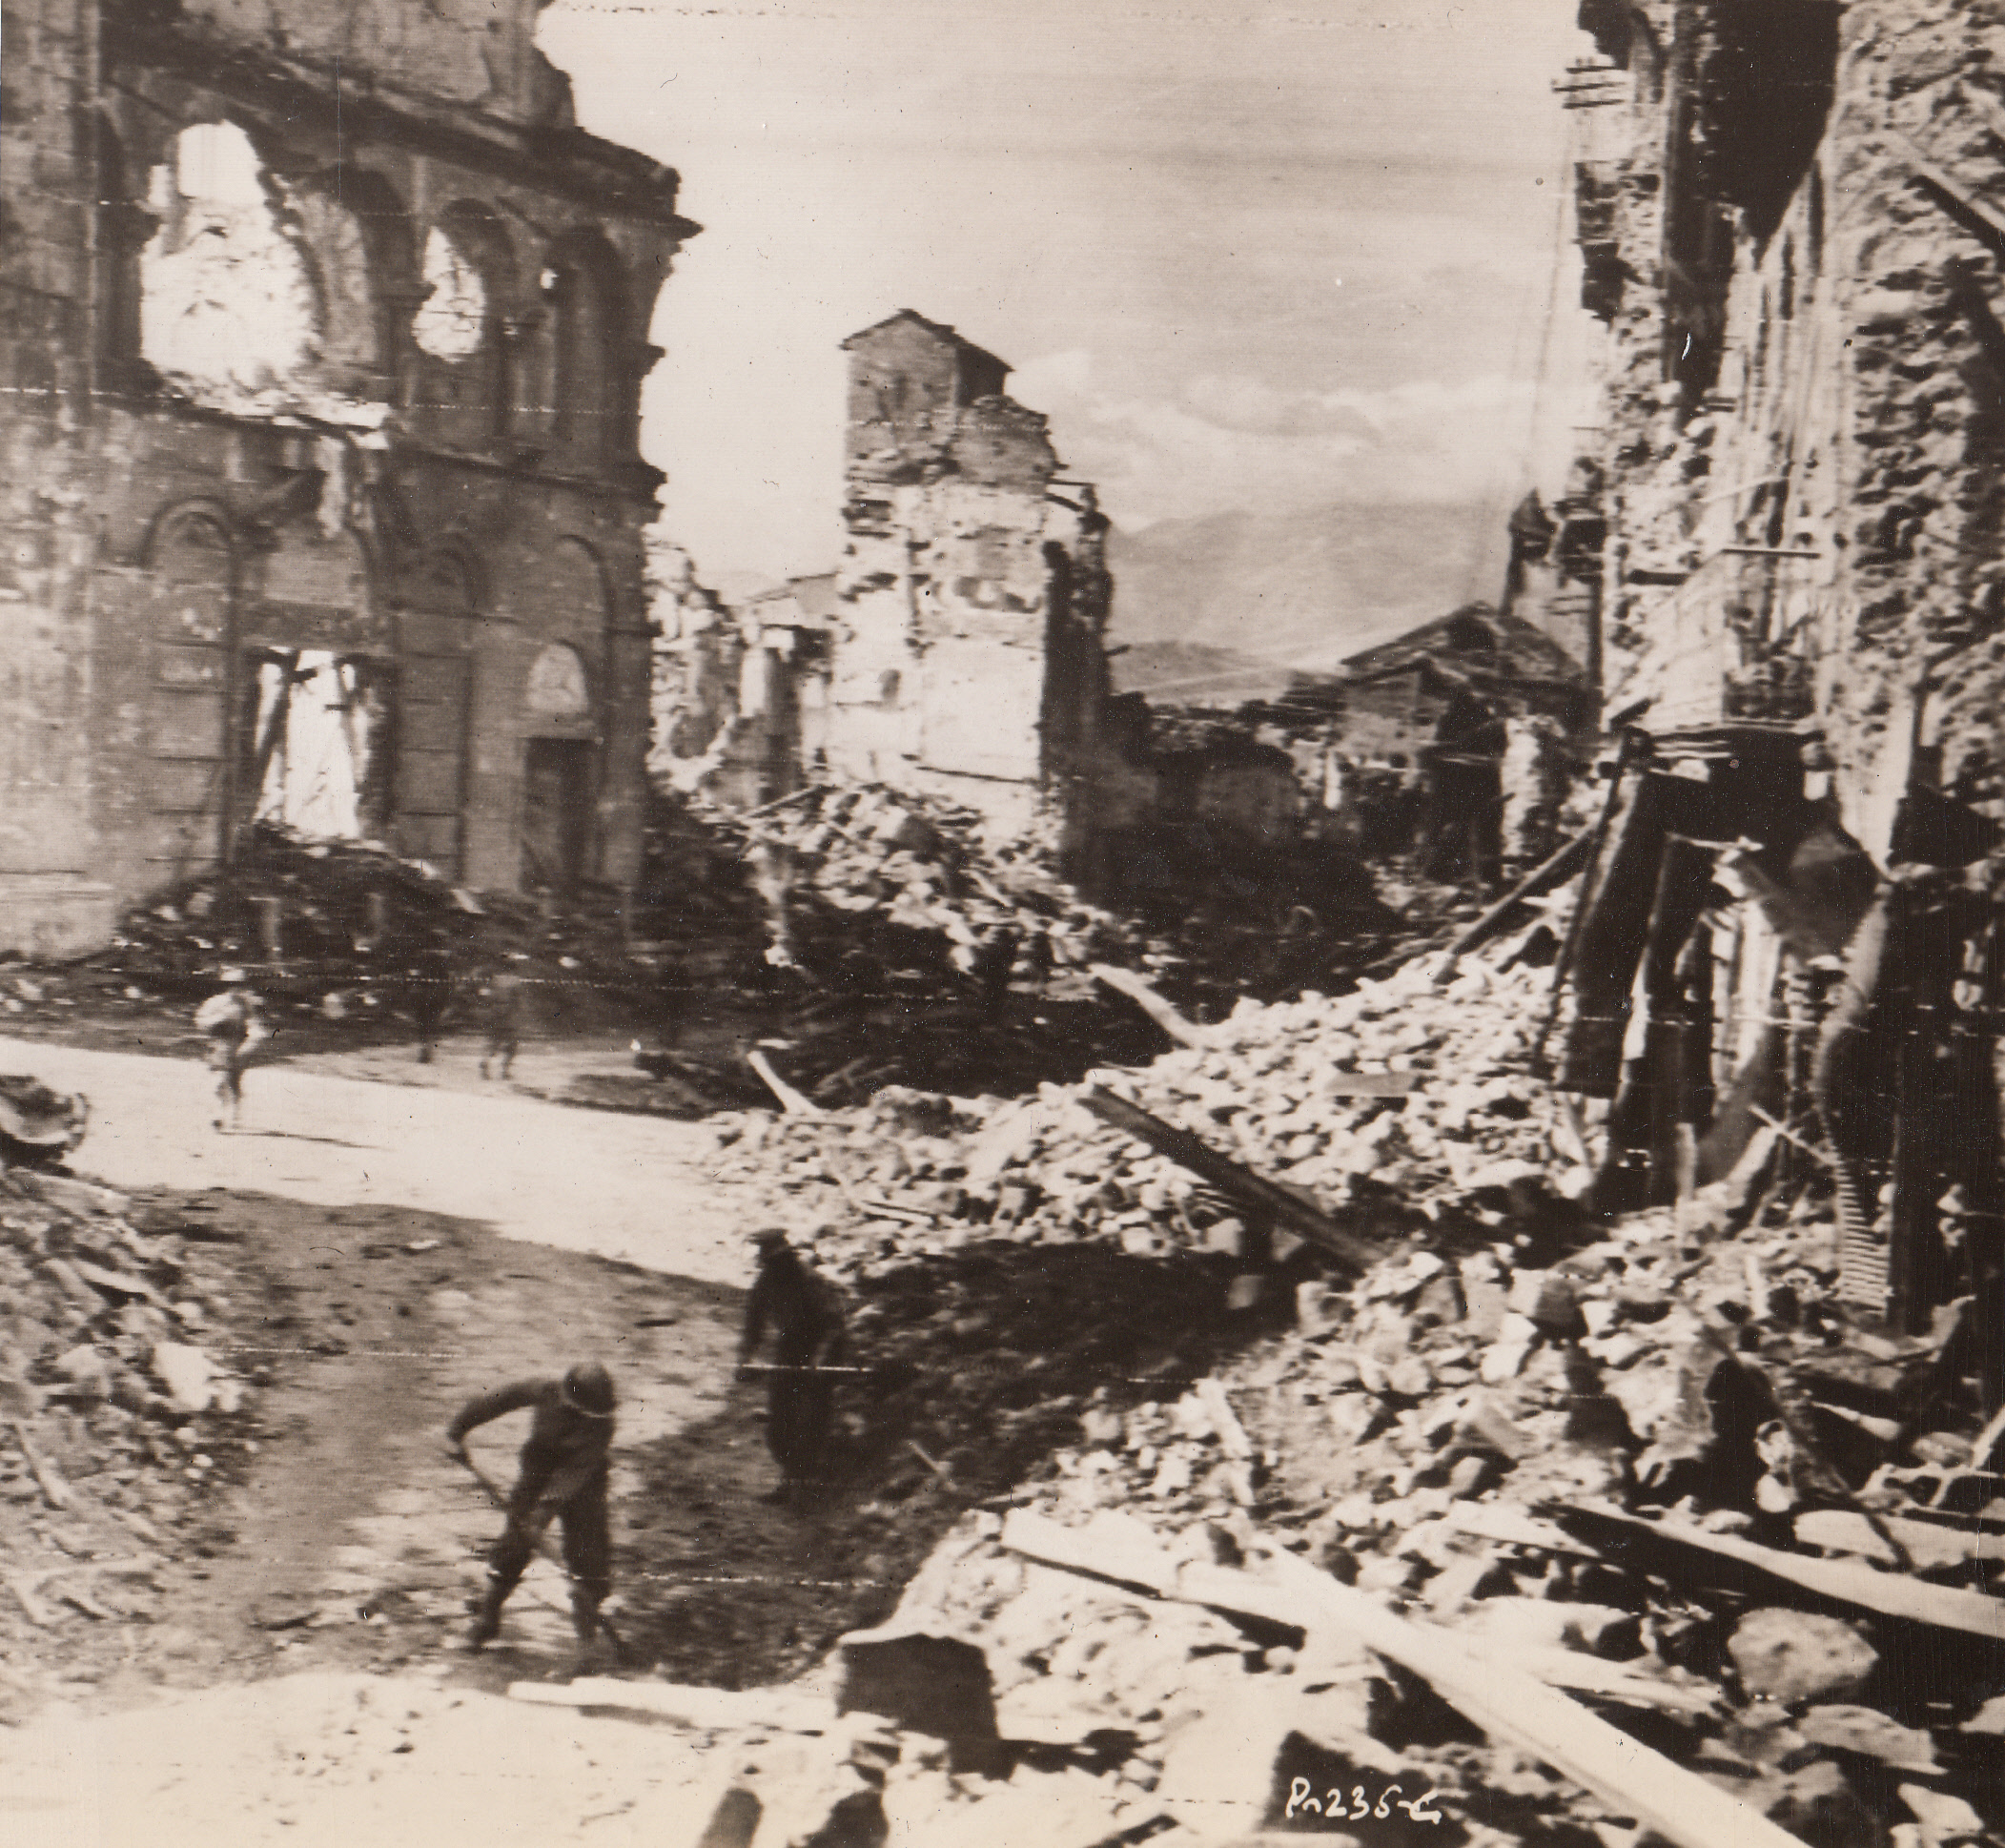 Road to Ruin Leads to Rome, 10/13/1943. BENEVENTO, ITALY – A few gutted buildings and streets piled high with rubble is all that is left of Benevento, one of the towns leading to Naples. Army engineers clear a road through the ruins while, in the background, American infantrymen press on toward the next town.;